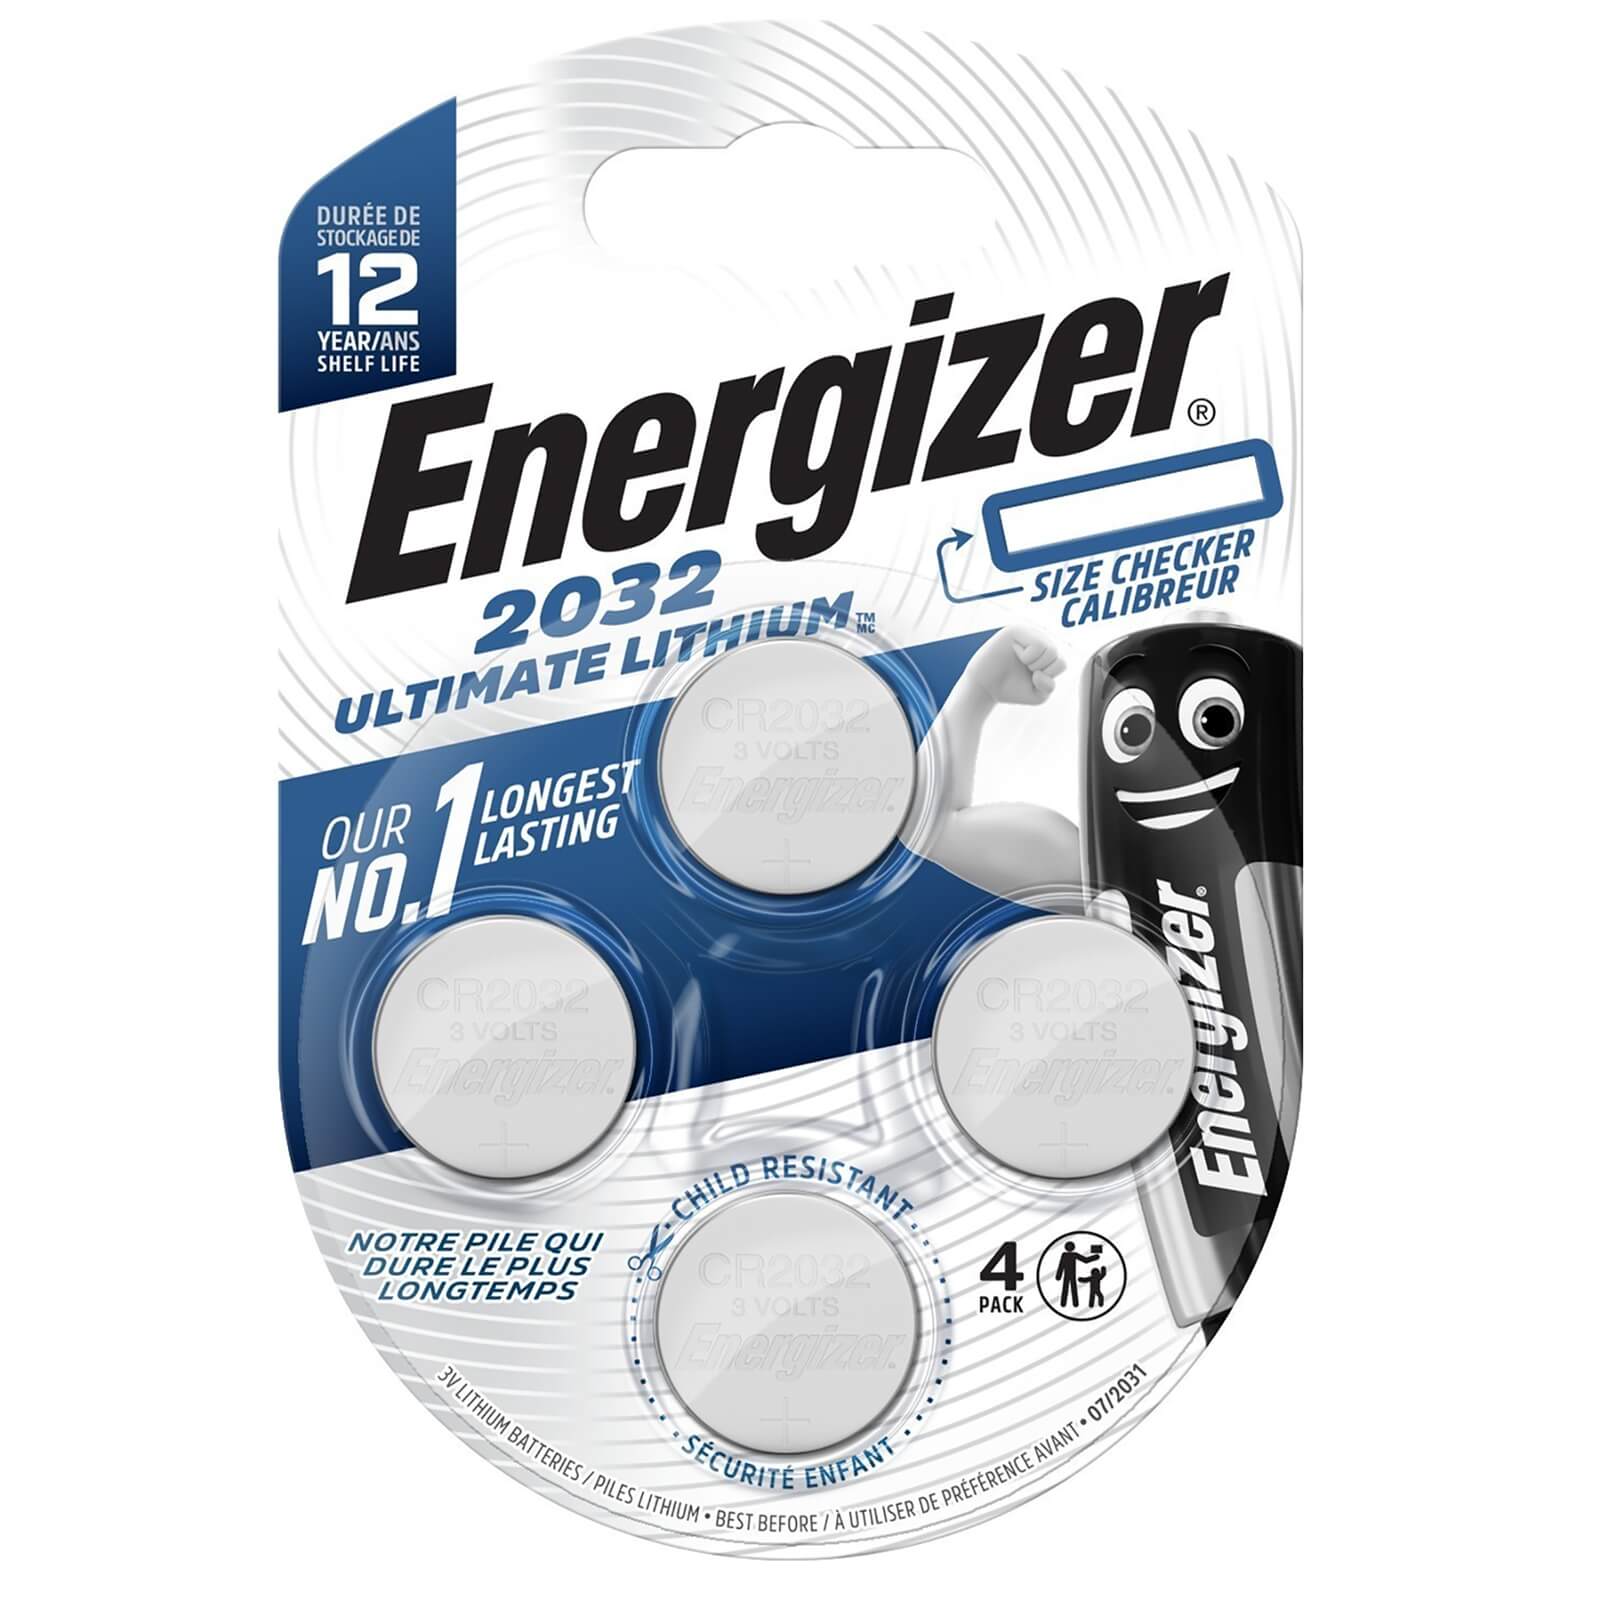 Energizer CR2032 Ultimate Lithium Coin Battery - 4 Pack